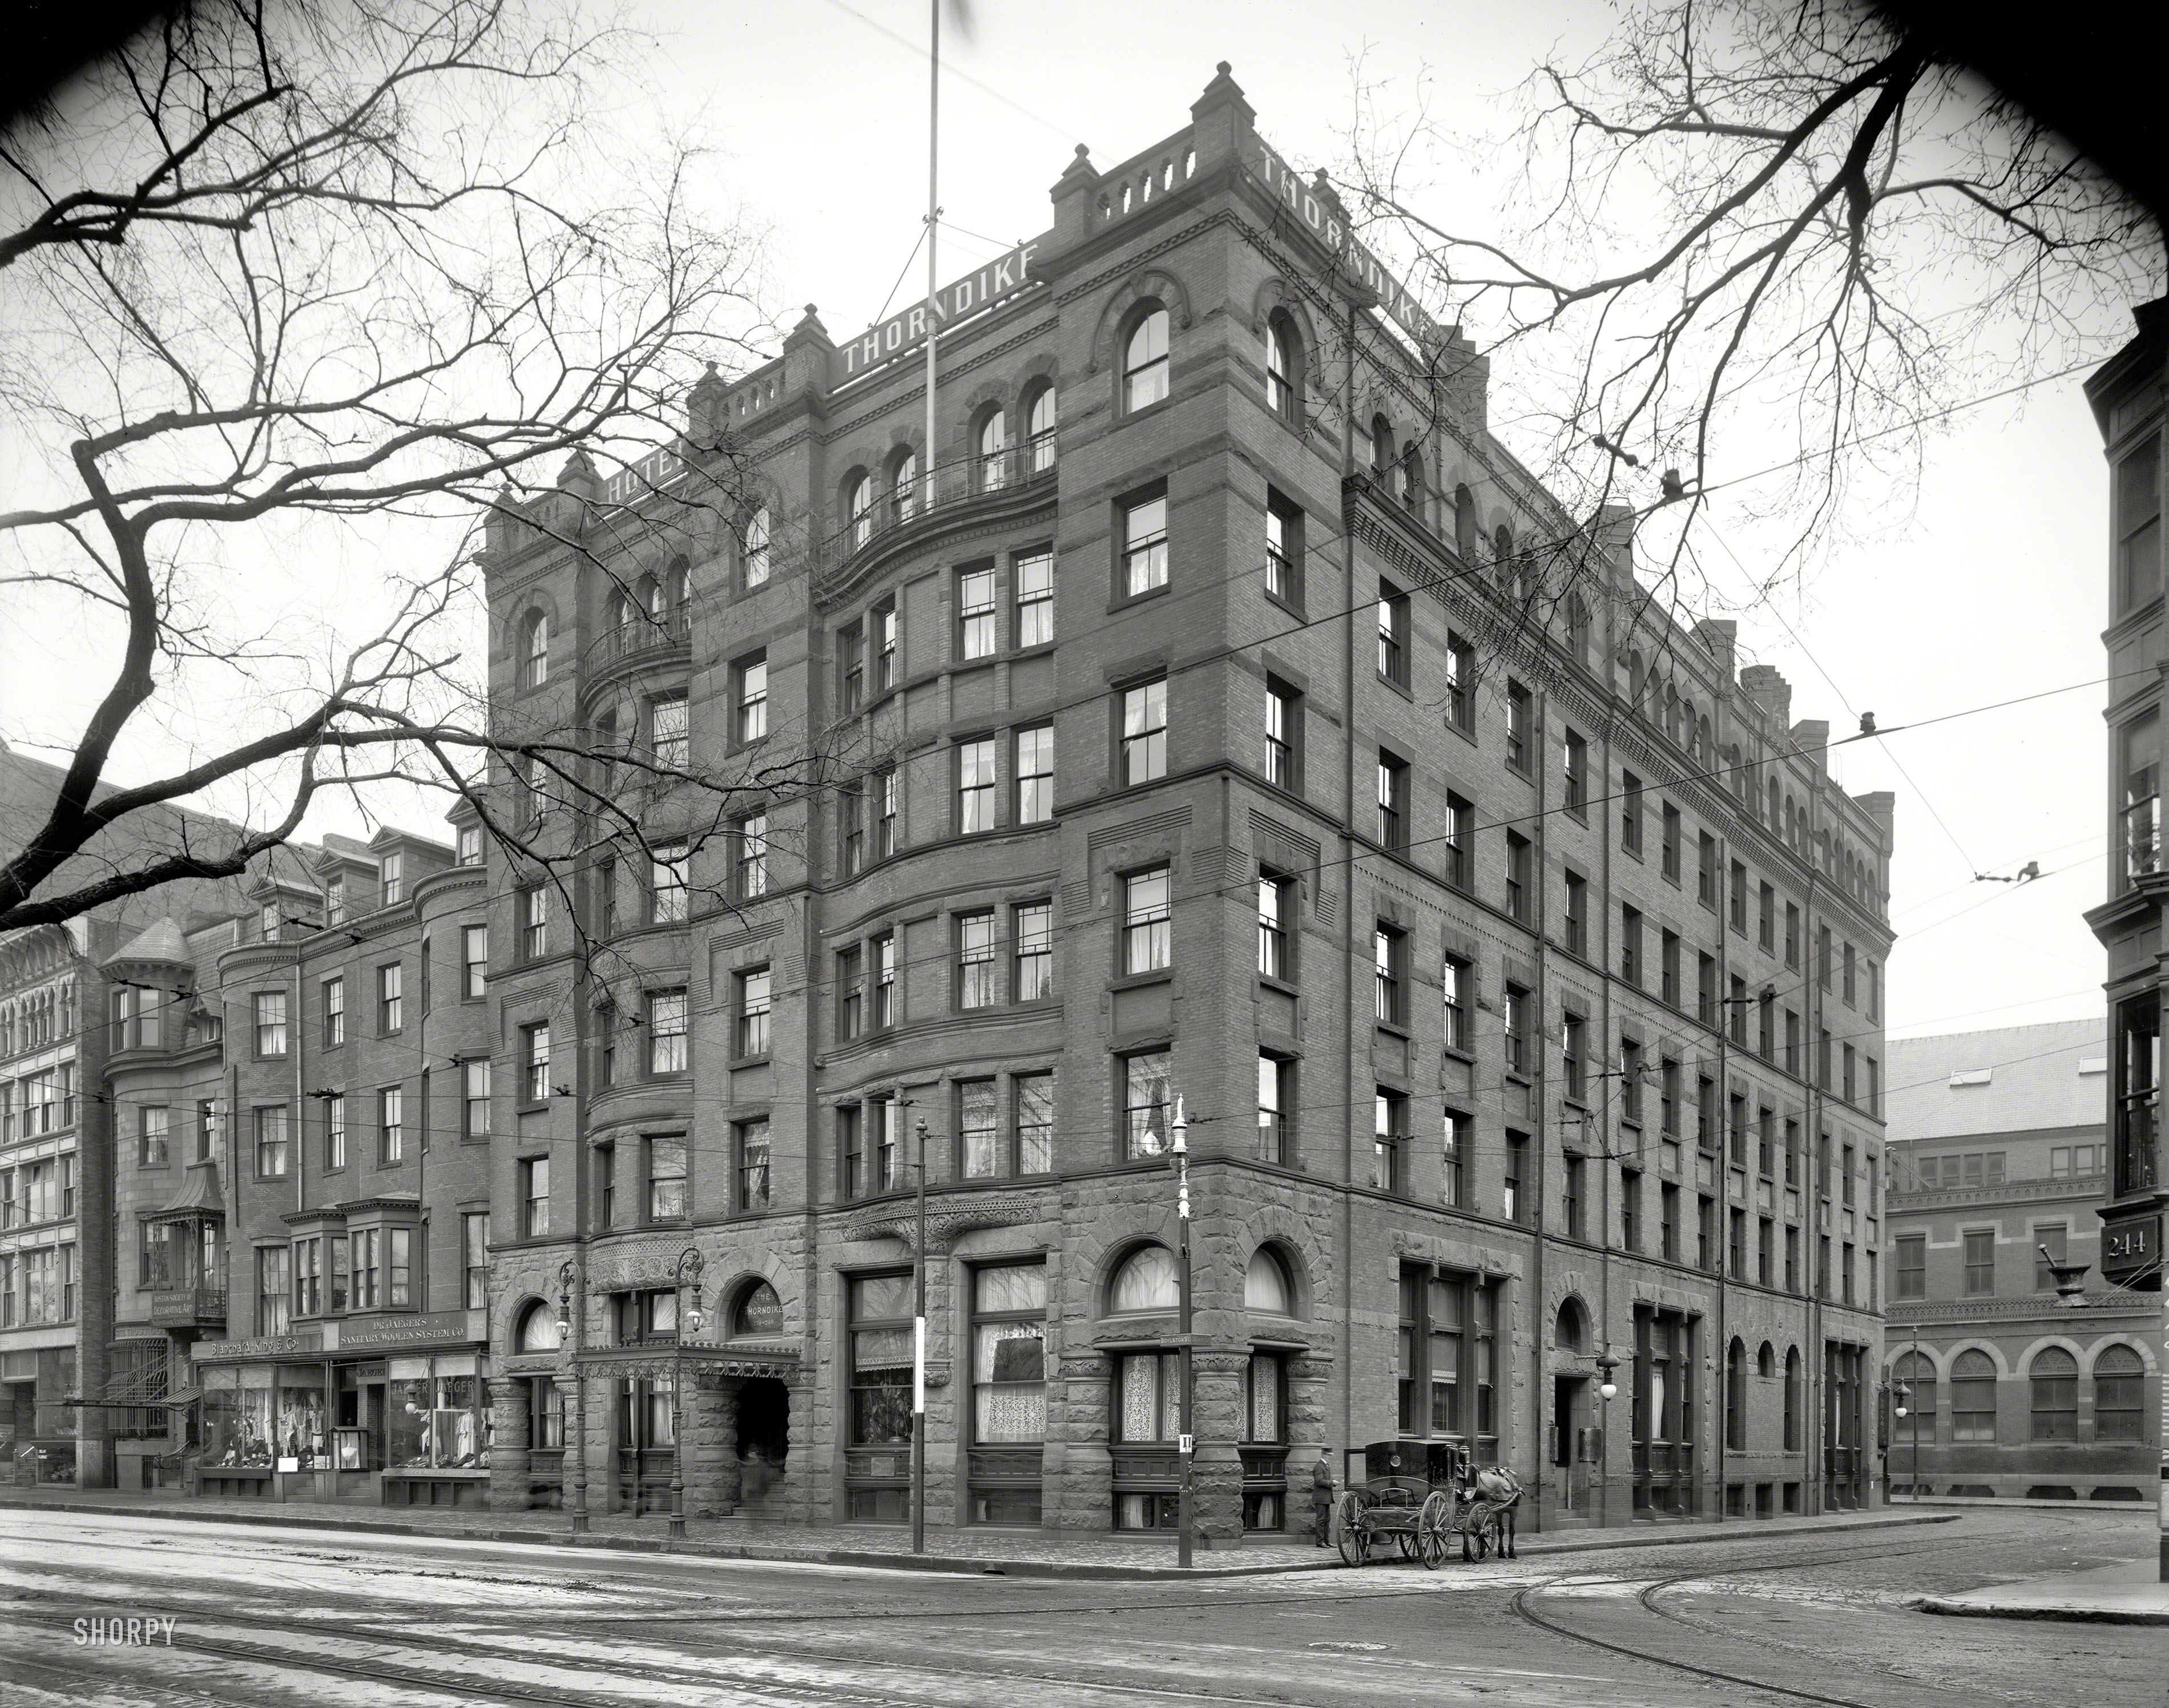 Boston circa 1904. "Hotel Thorndike, Boylston and Church Sts." Next door to the intriguingly named "Dr. Jaeger's Sanitary Woolen System." View full size.